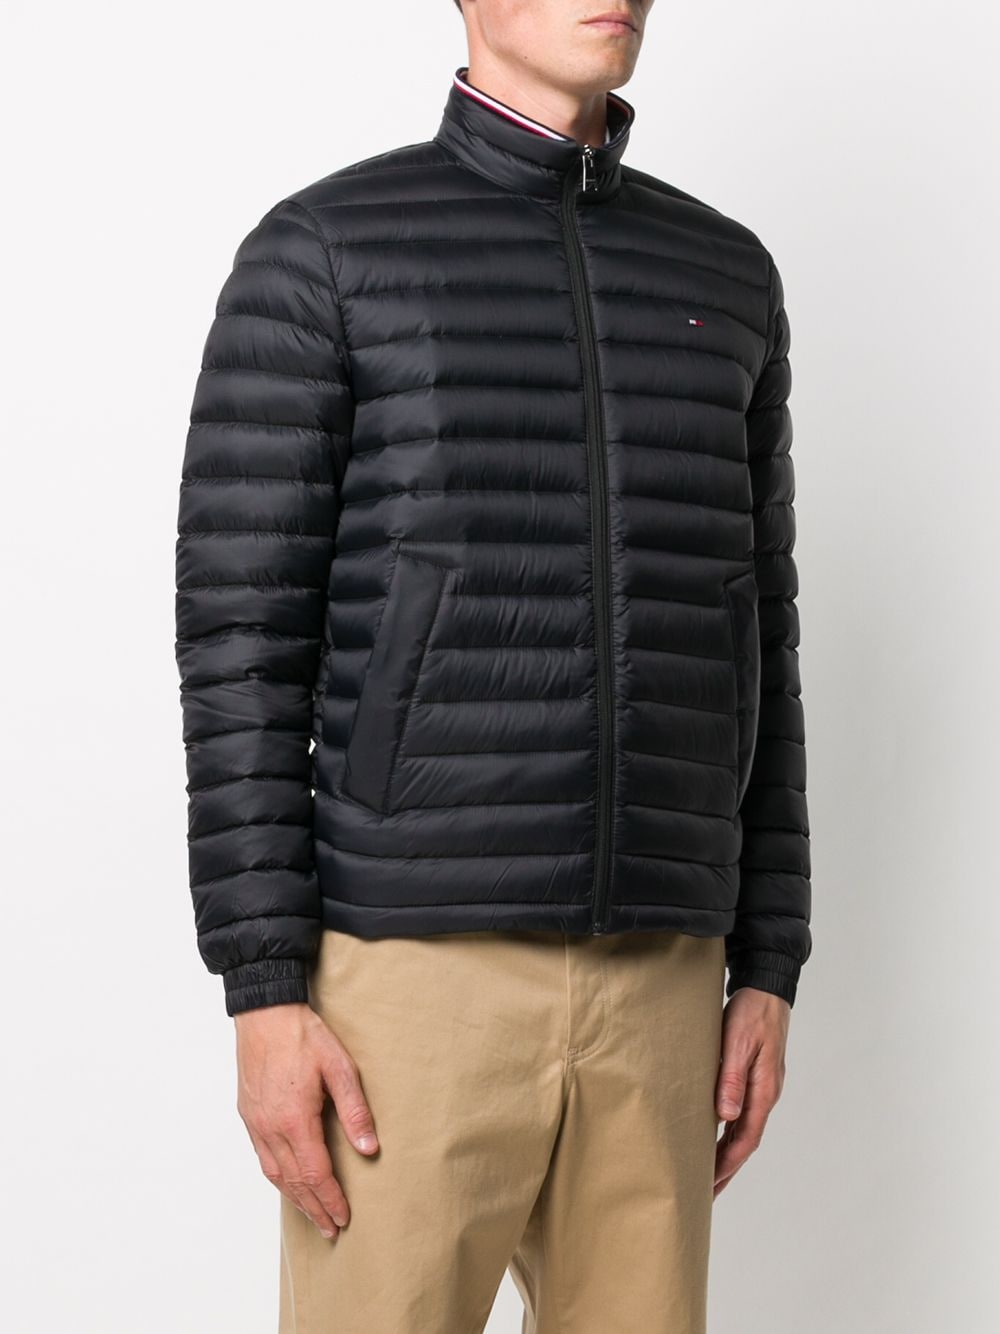 Shop Tommy Hilfiger padded zipped jacket with Express Delivery - FARFETCH